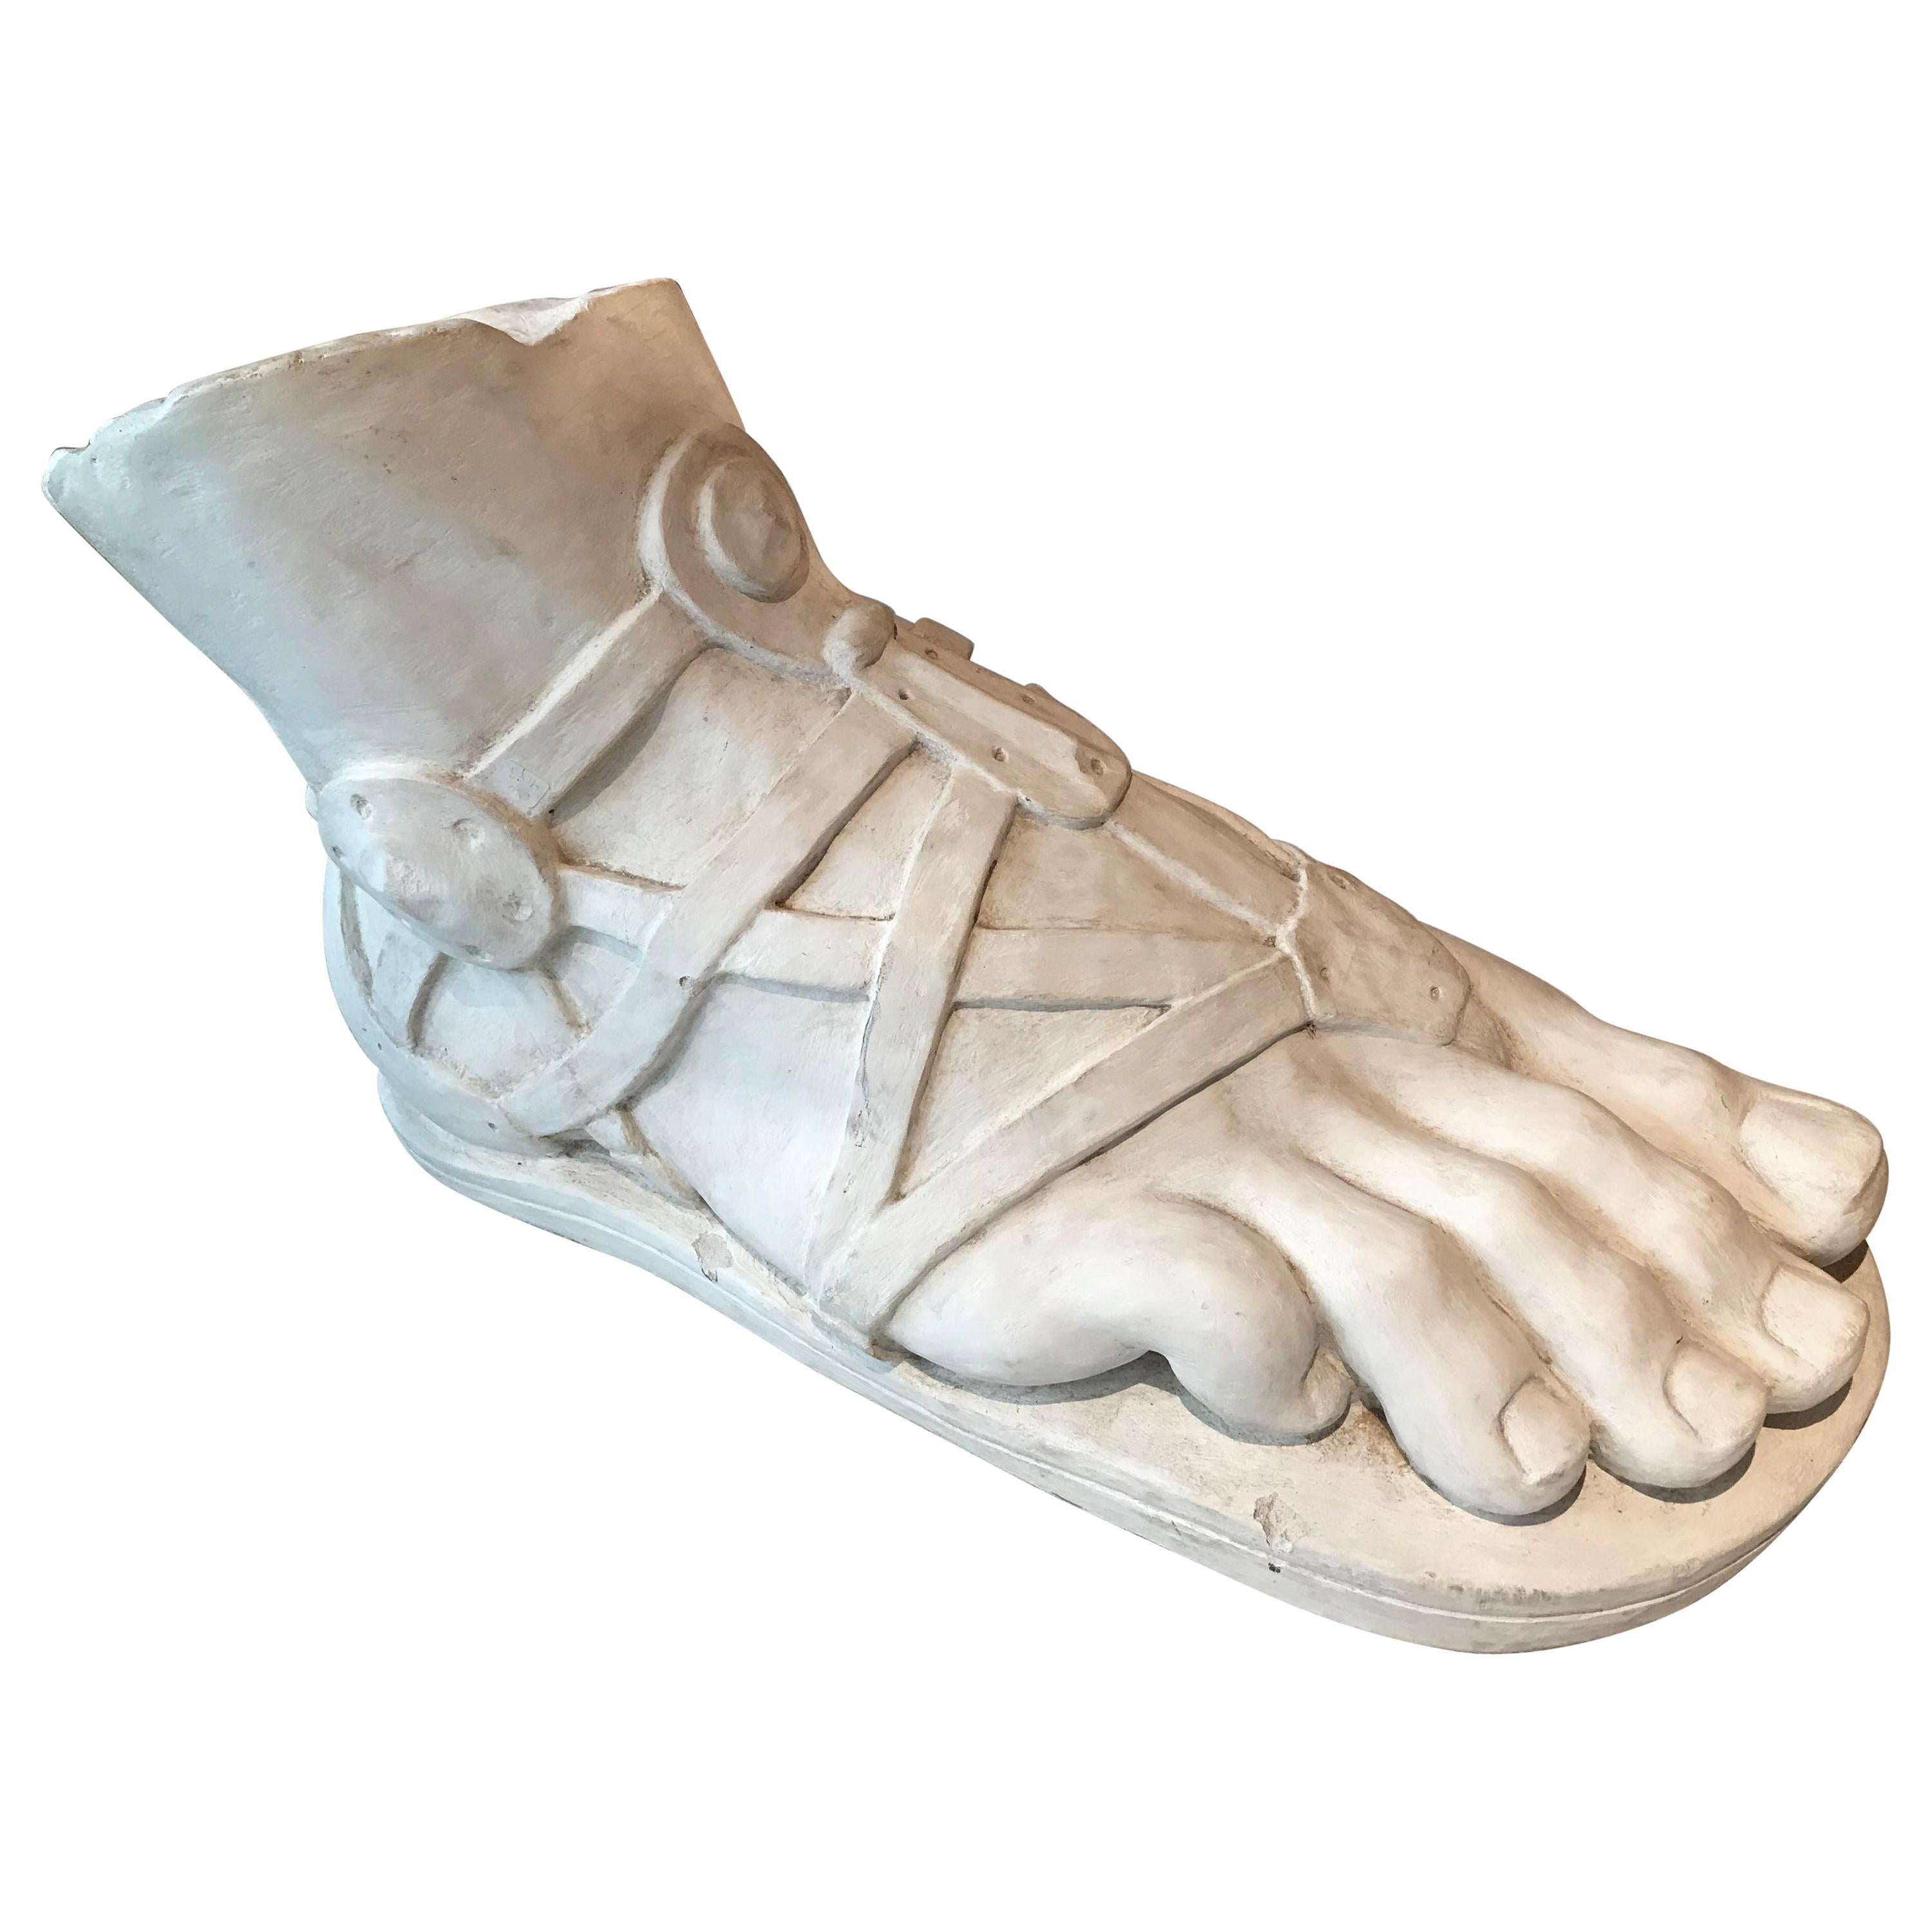 Concrete Roman Ruin Style Figure of Foot with Sandal For Sale